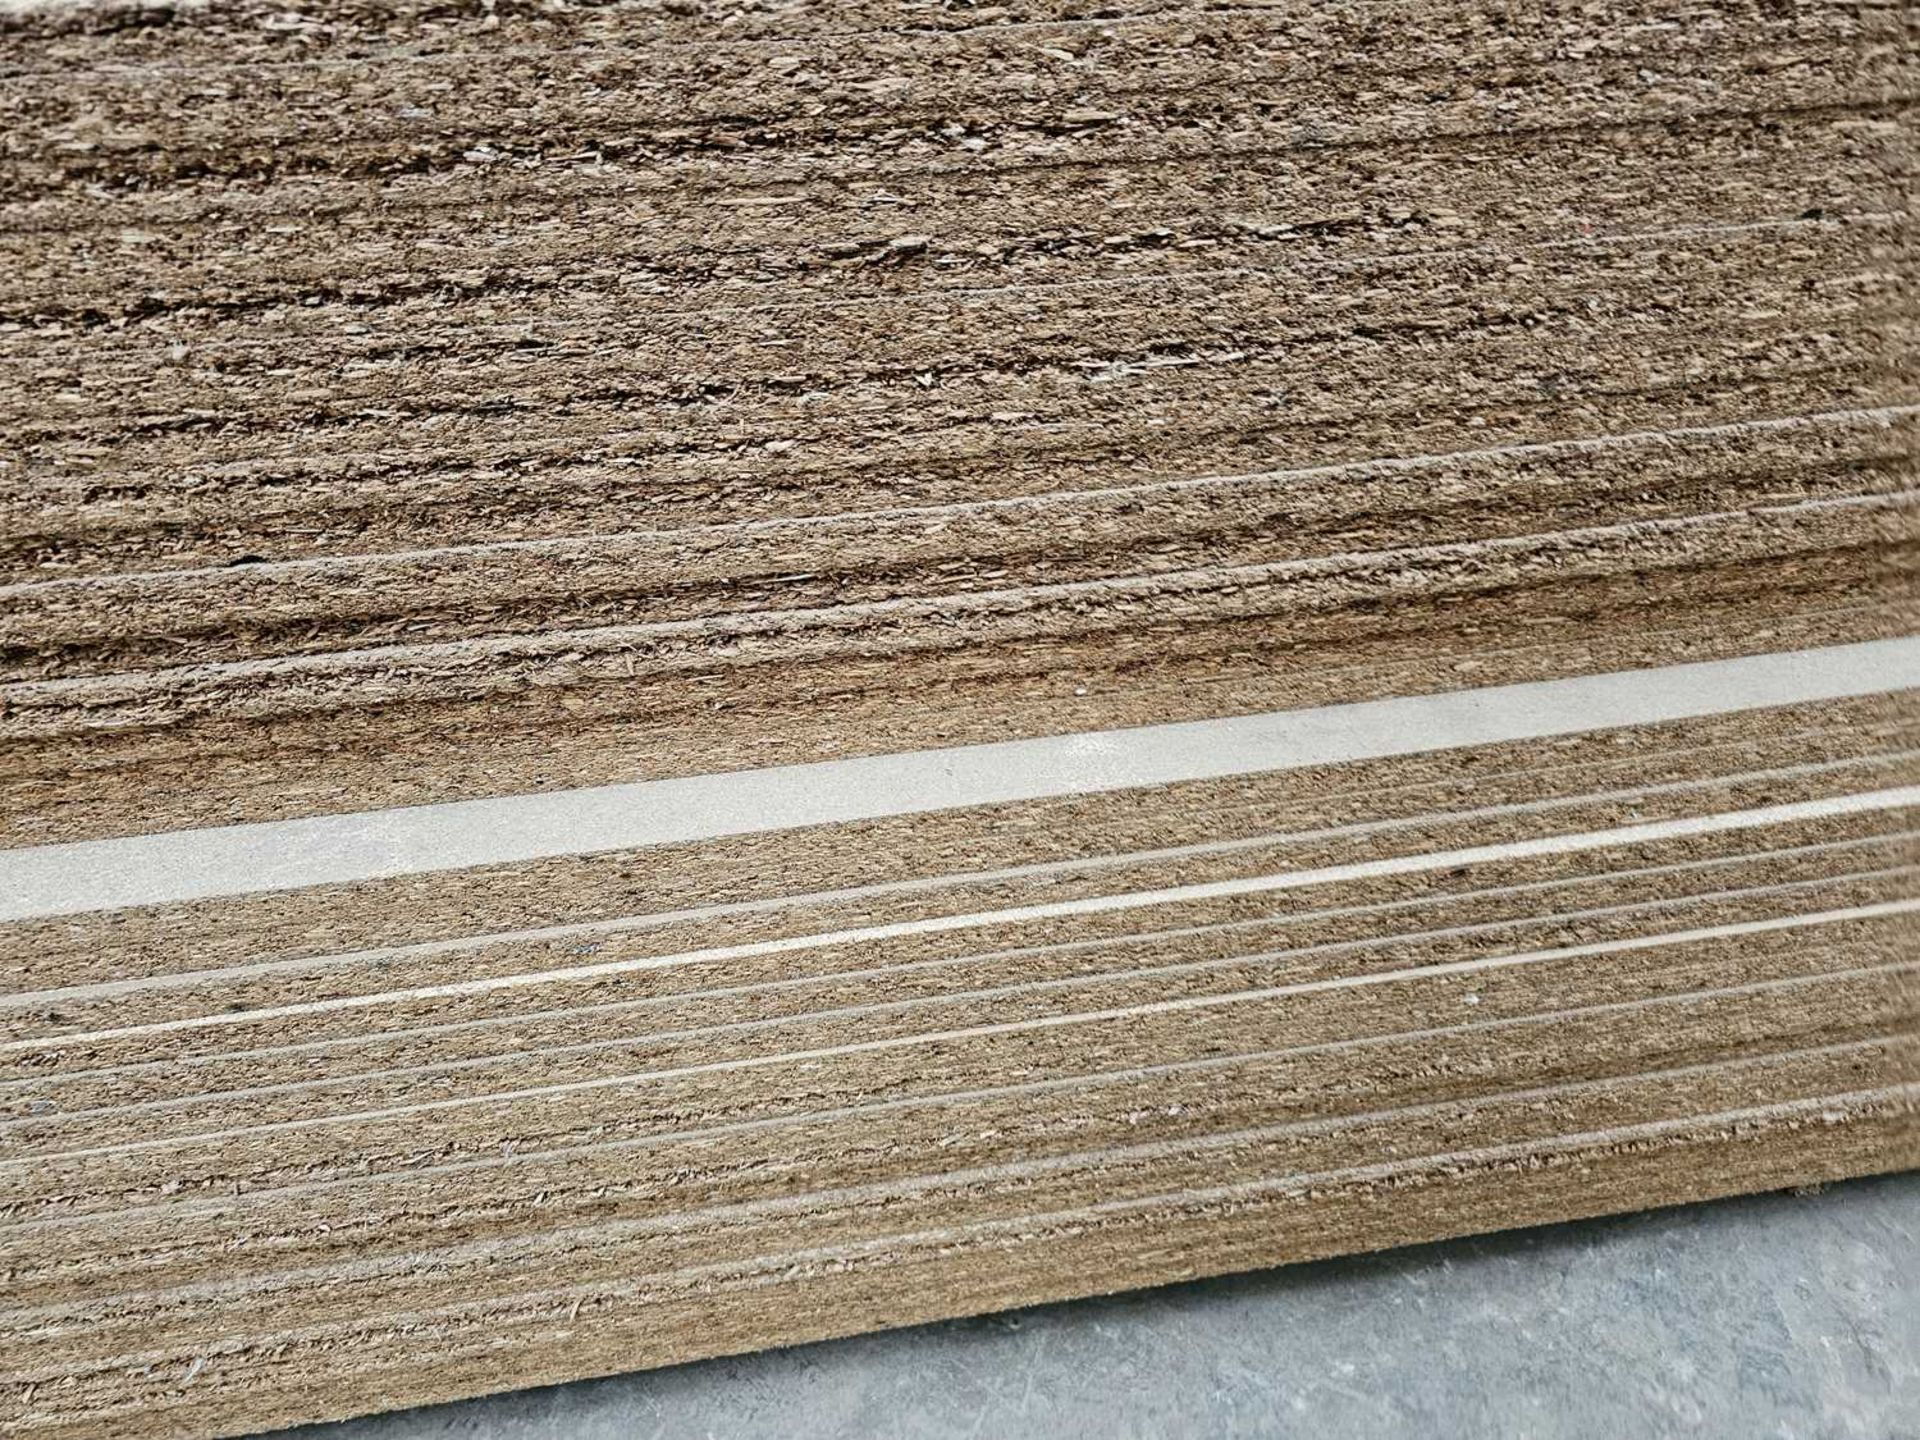 Selection of Chip Board Sheets (302cm x 183cm x 18mm)(36 of) - Image 3 of 3